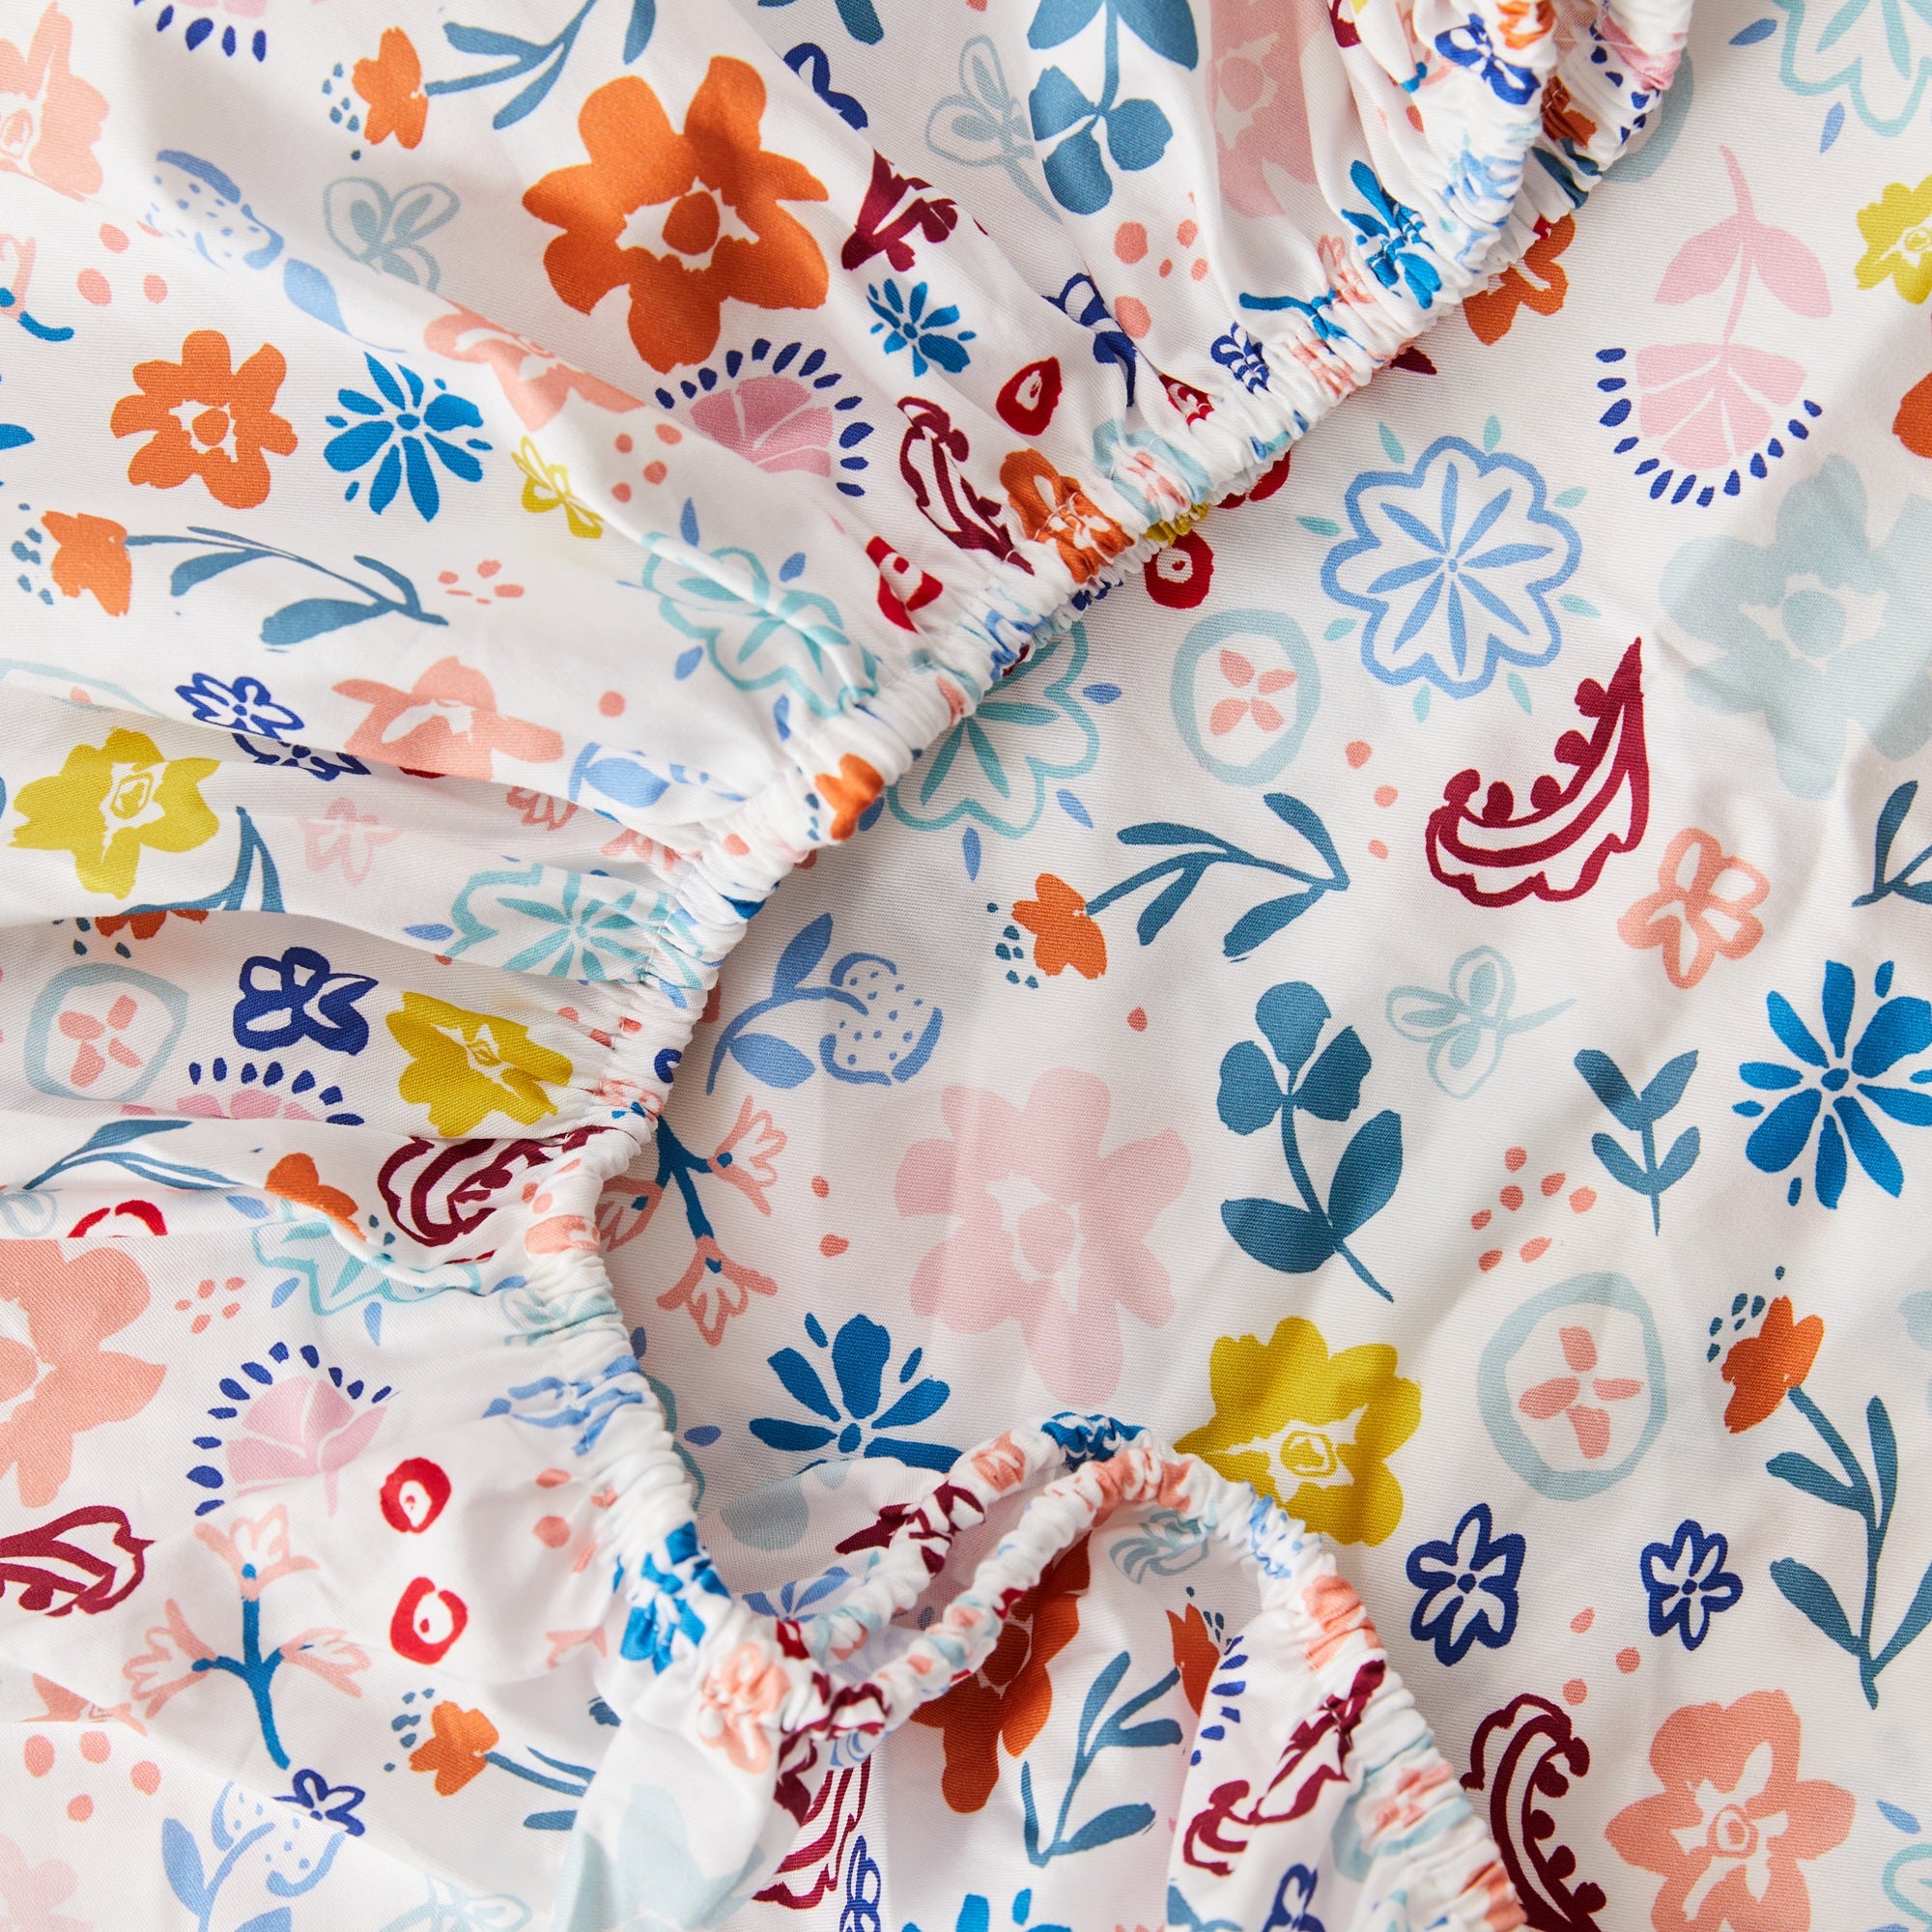 Floral Organic Cotton Fitted Sheet